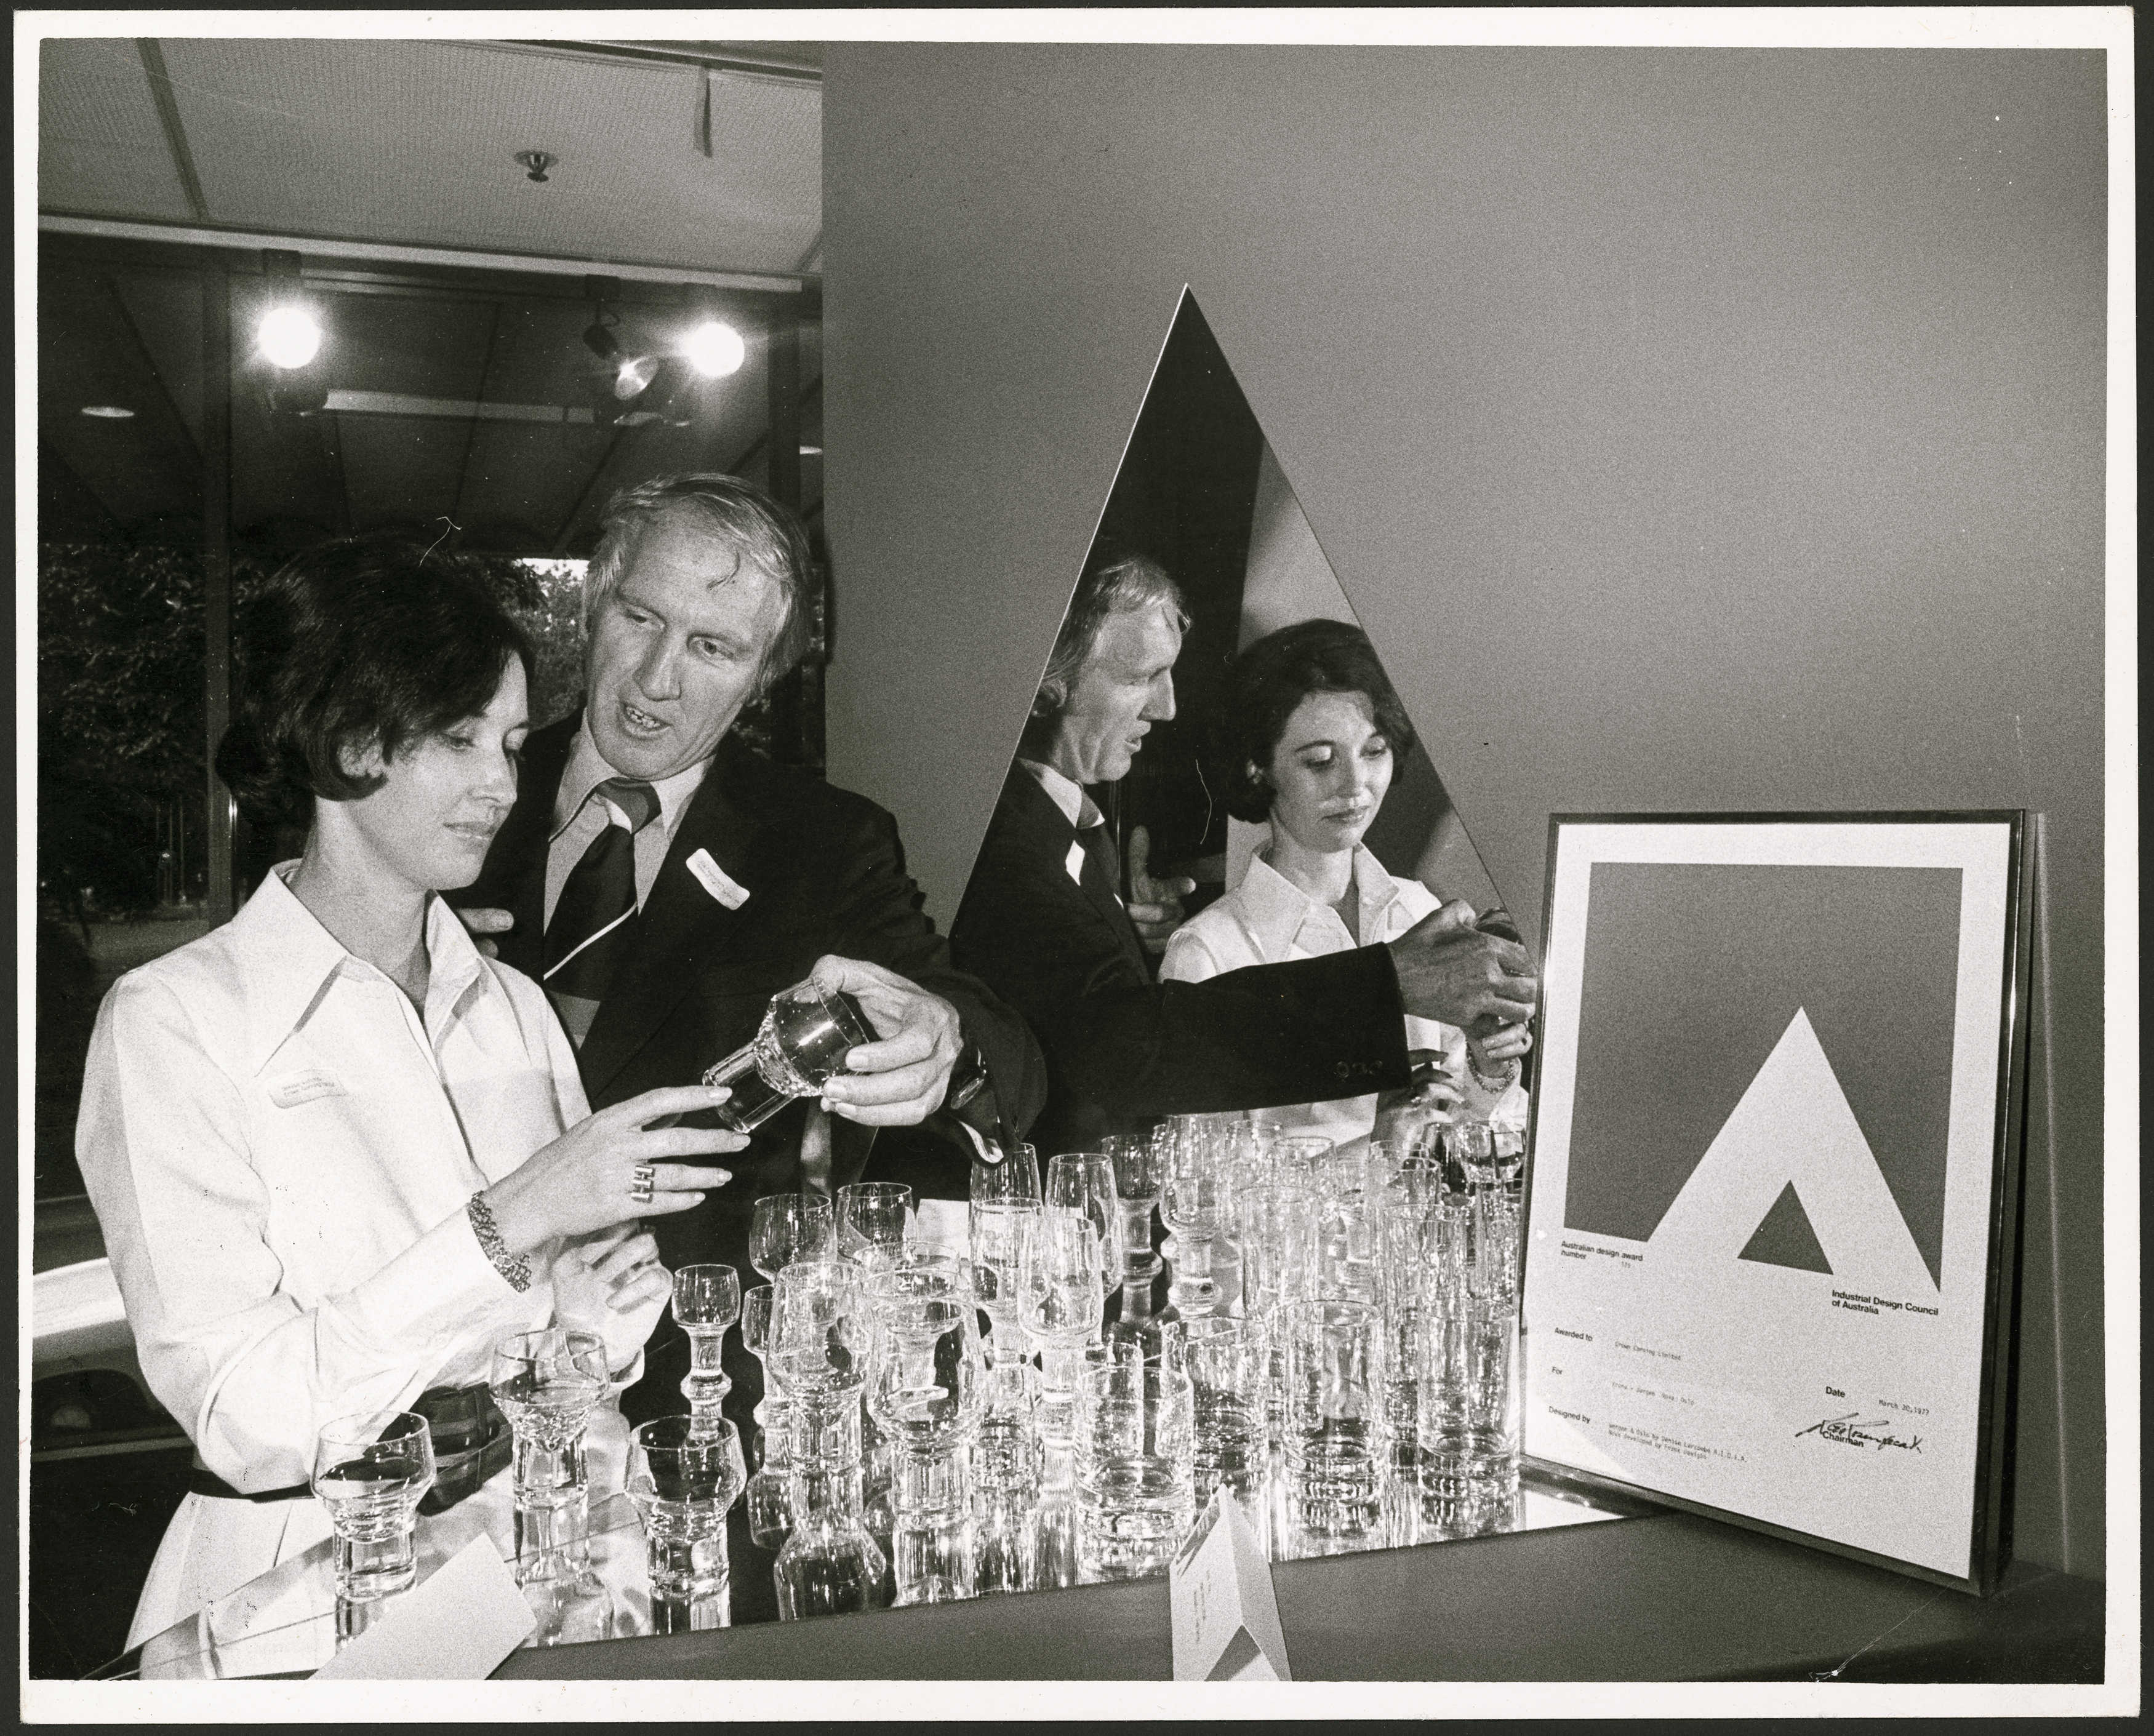 Black and white photograph of a woman and man, both holding a drinking glass. There is a large display of drinking glasses in front of them and a framed award on the right of the image.